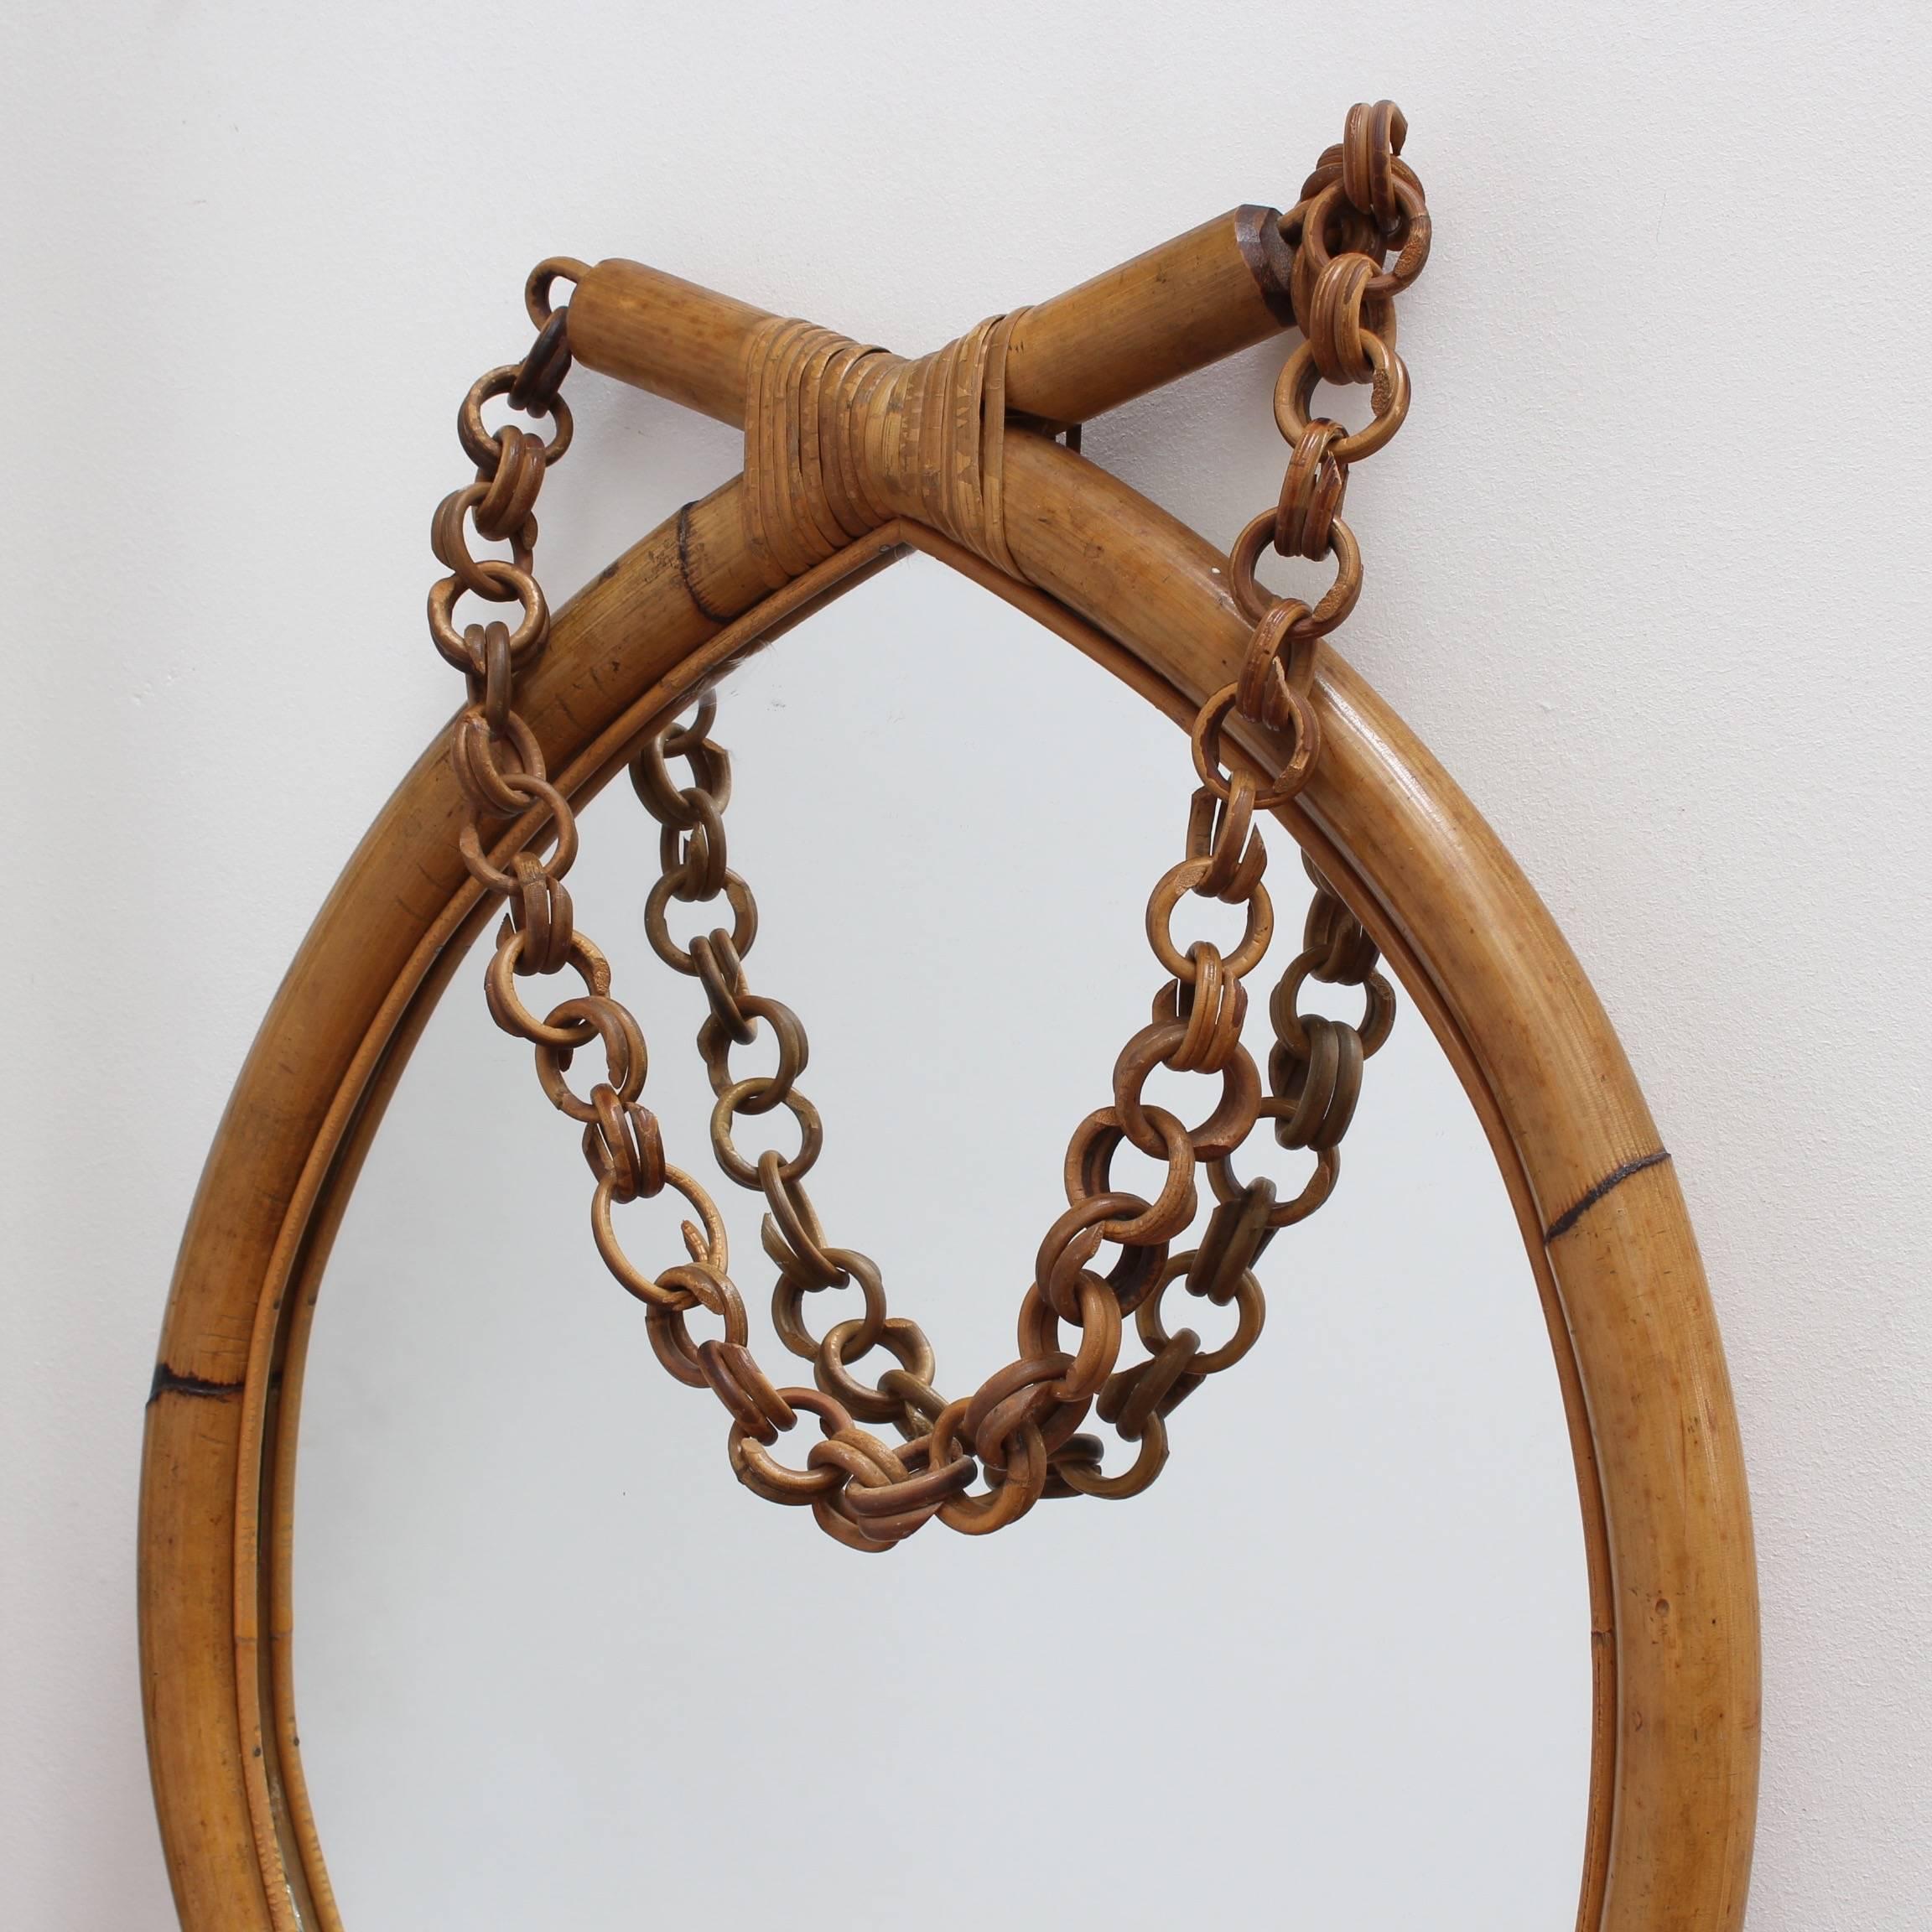 Italian 'eye-shaped' bamboo and rattan wall mirror (circa 1960s). Wide-caned bamboo in the shape of an eye is bound with rattan strips and sports a rattan hanging chain. There is a graceful, aged patina on the mirror frame. In very good vintage